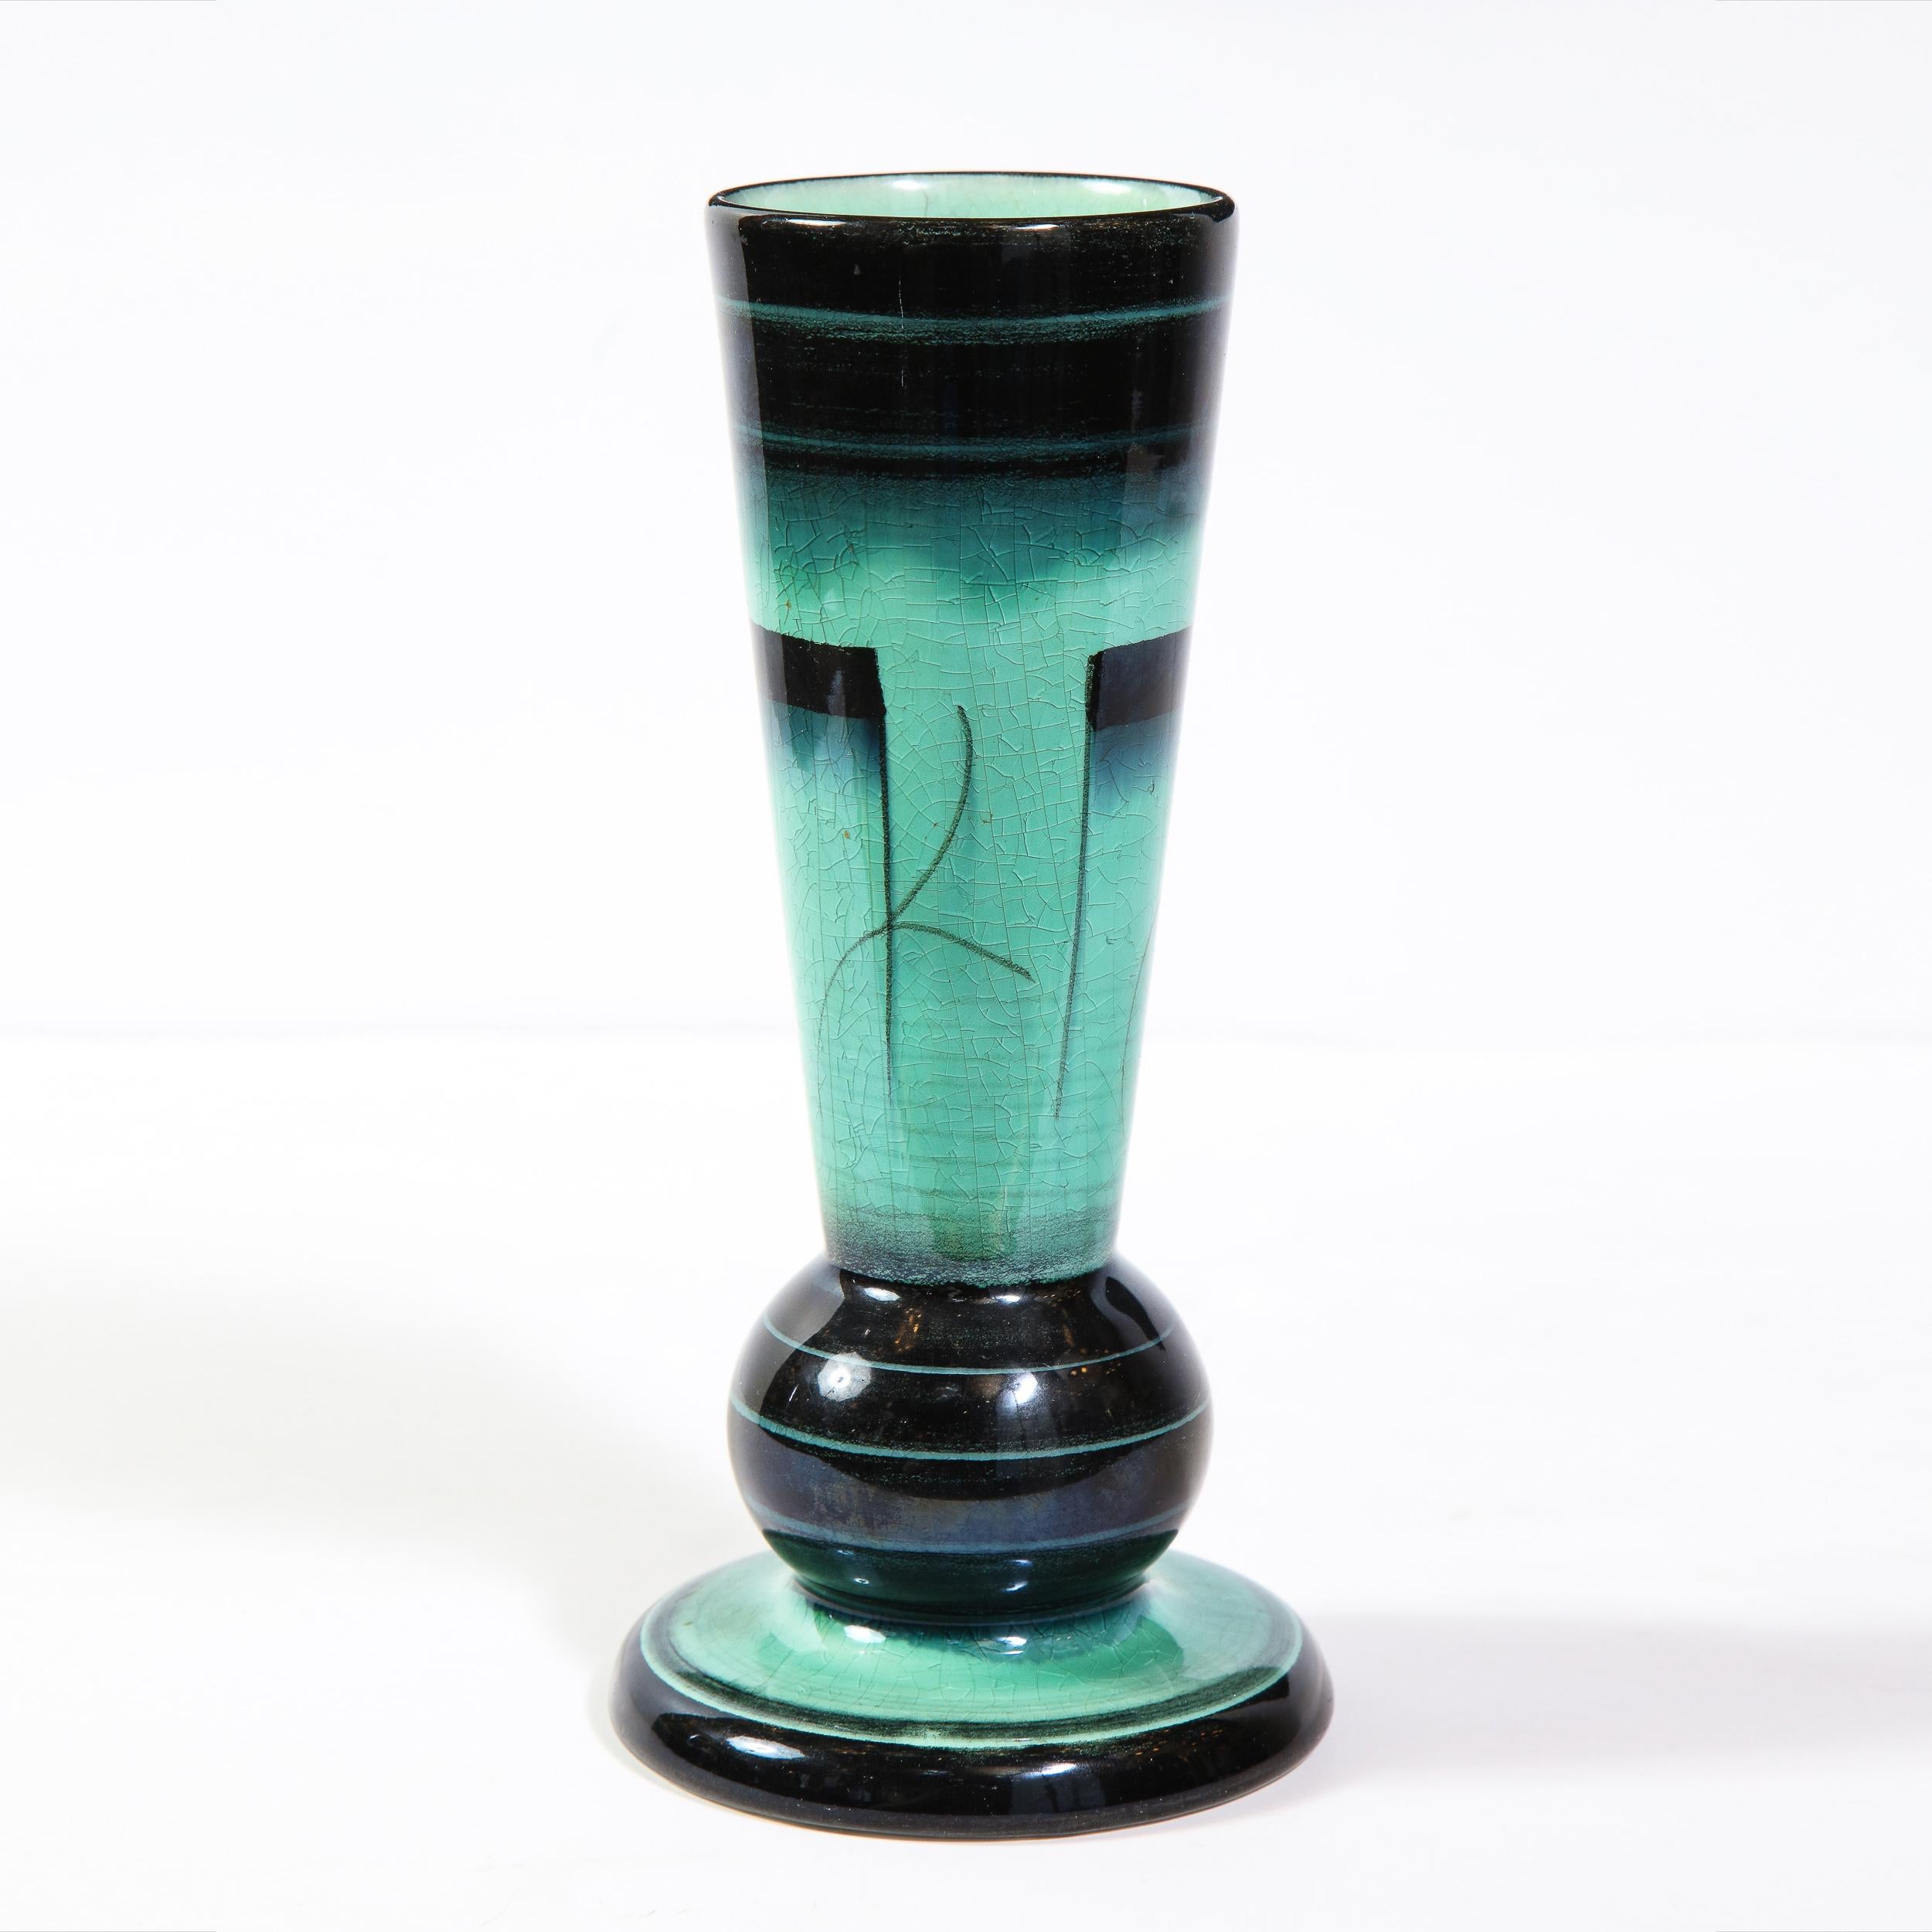 This elegant Art Deco glazed ceramic vase was designed by Ilse Claesson for Rörstrand in Sweden, circa 1930. It features a stylized hour glass form with a striated onyx glazed base and a sea foam center with abstract hand painted motifs, as well as